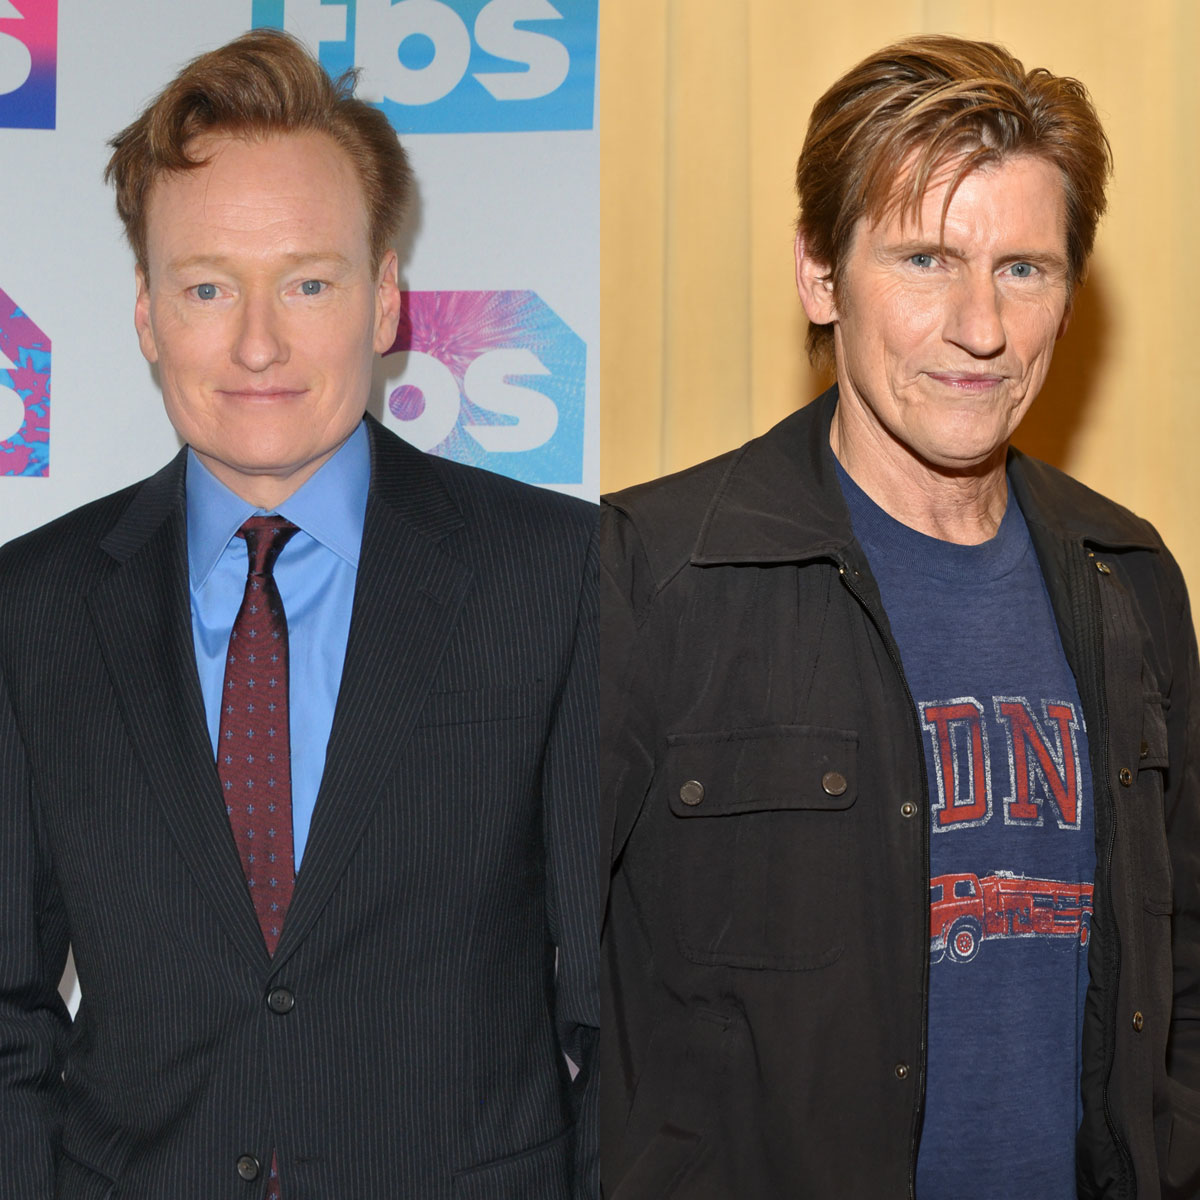 Conan O'Brien and Denis Leary are related